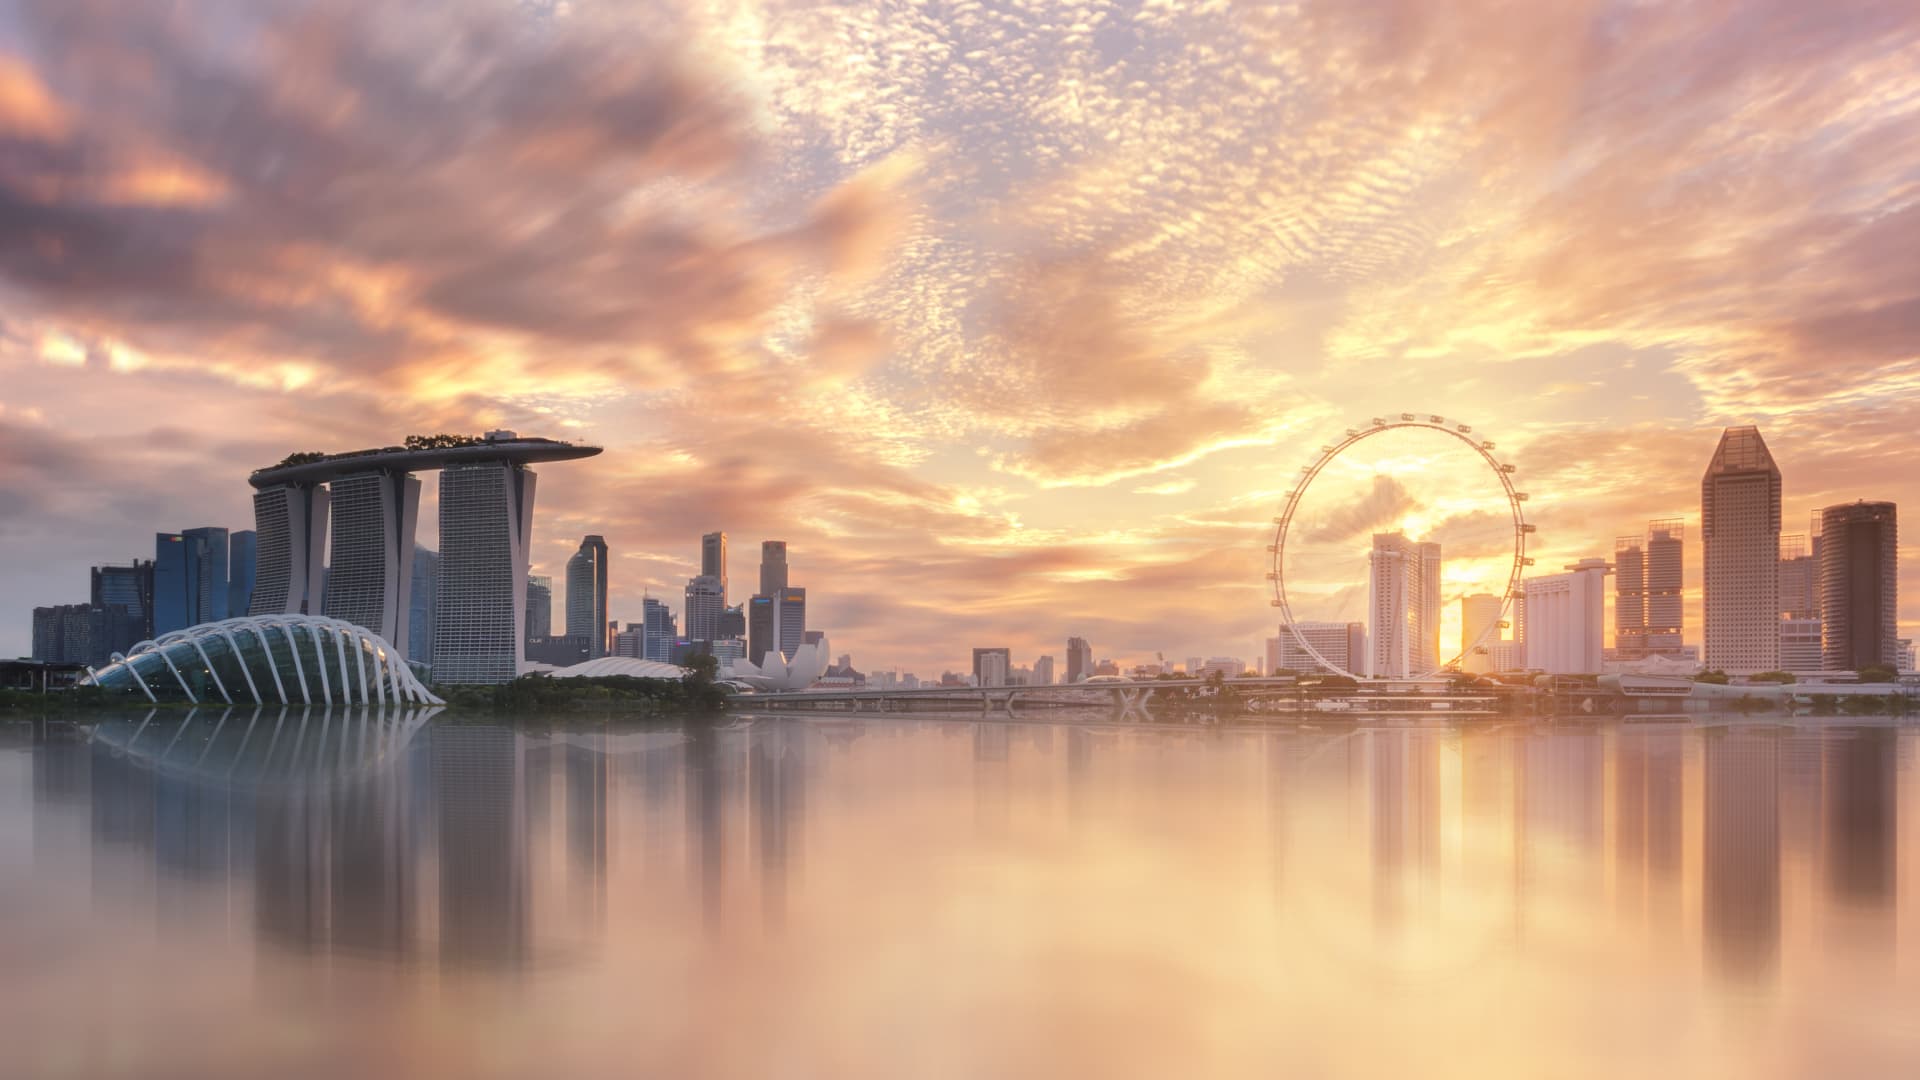 Singapore’s passport is now the most powerful in the world. Here’s how other countries ranked